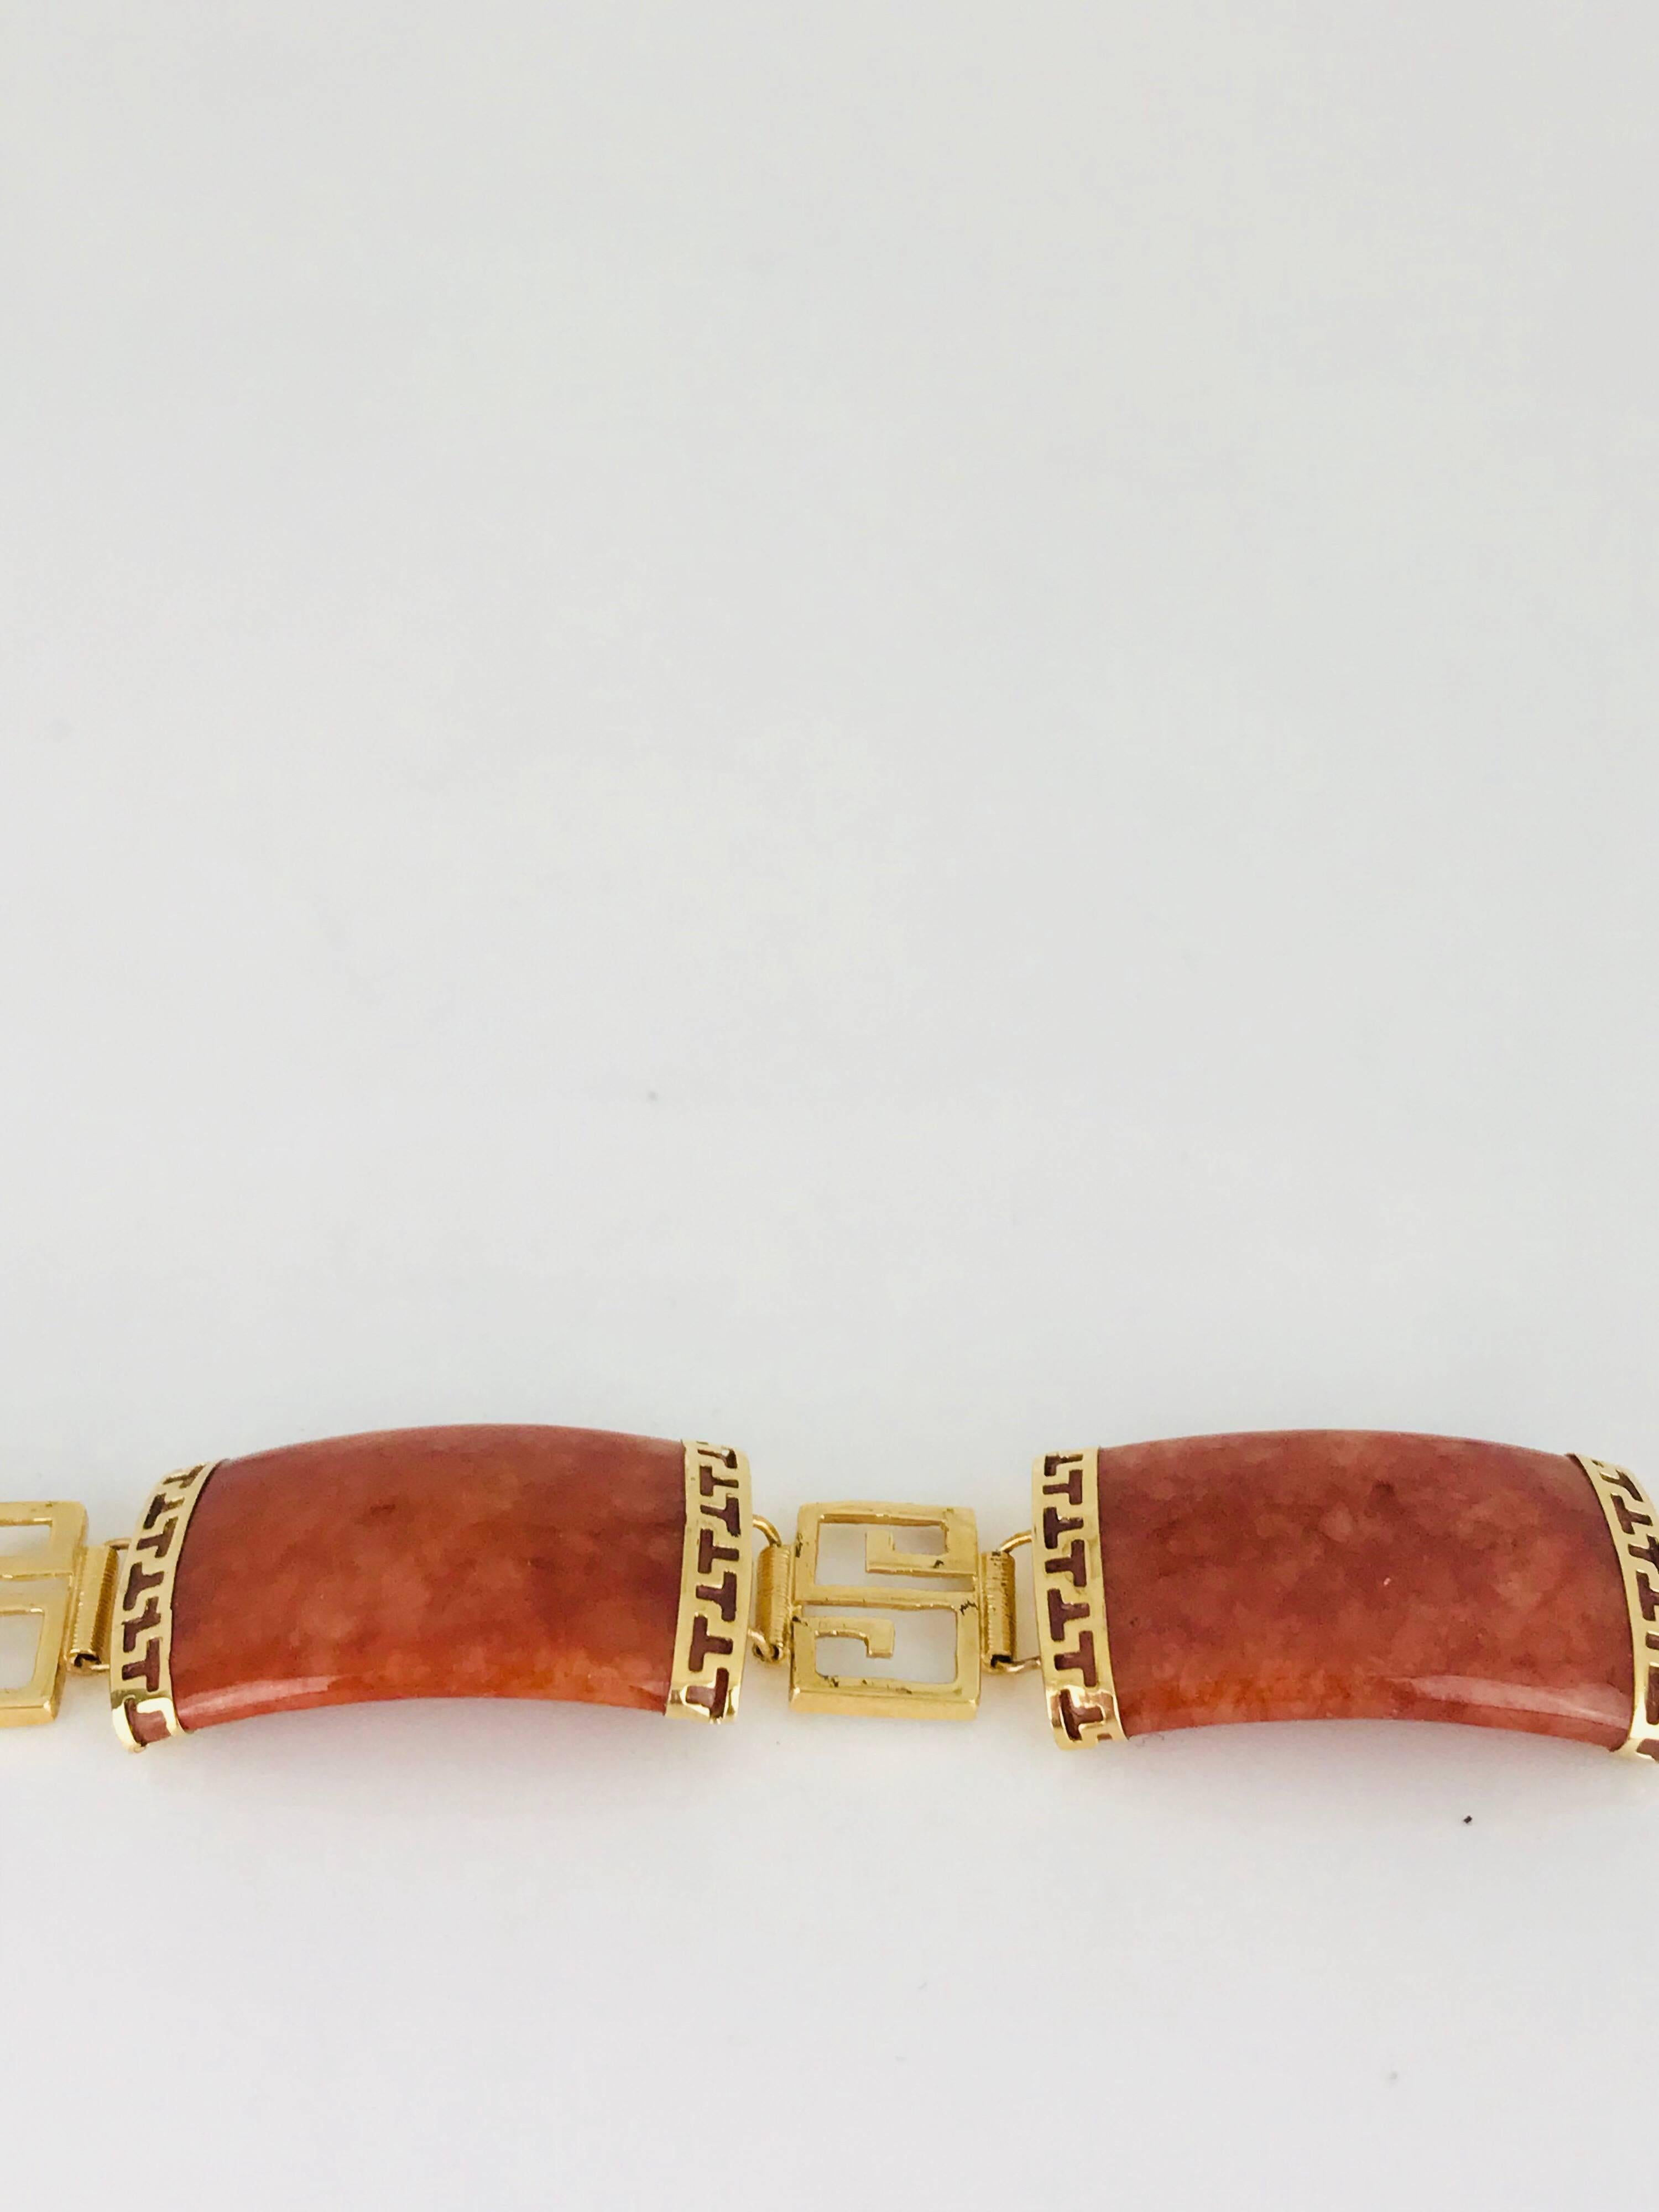 14 Karat yellow gold Jade bracelet. A stunning, 
Orange Marmalade color.
The length of the bracelet is 7-3/4 inches in length. 
This Retro bracelet is Circa 1965

GIA Gemologist Inspected & Evaluated $2000